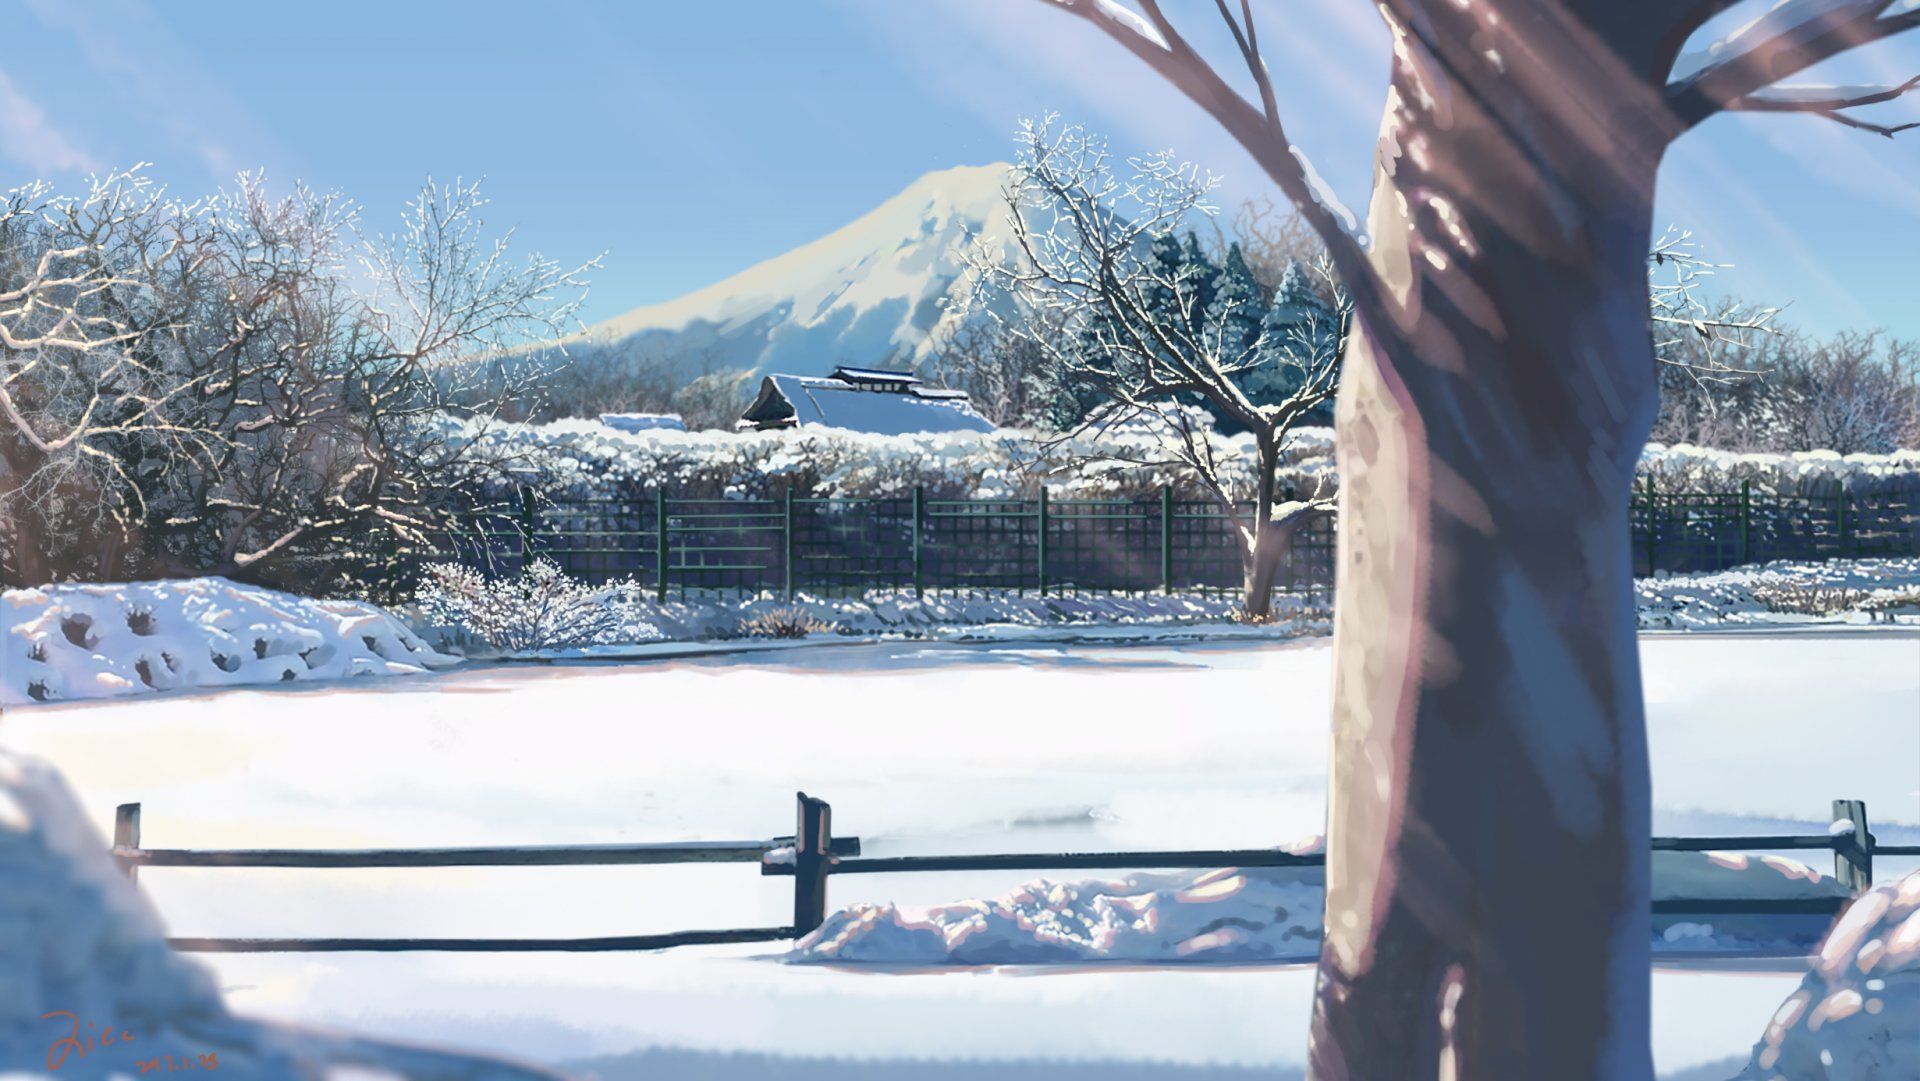 Anime Snow Landscape Wallpapers